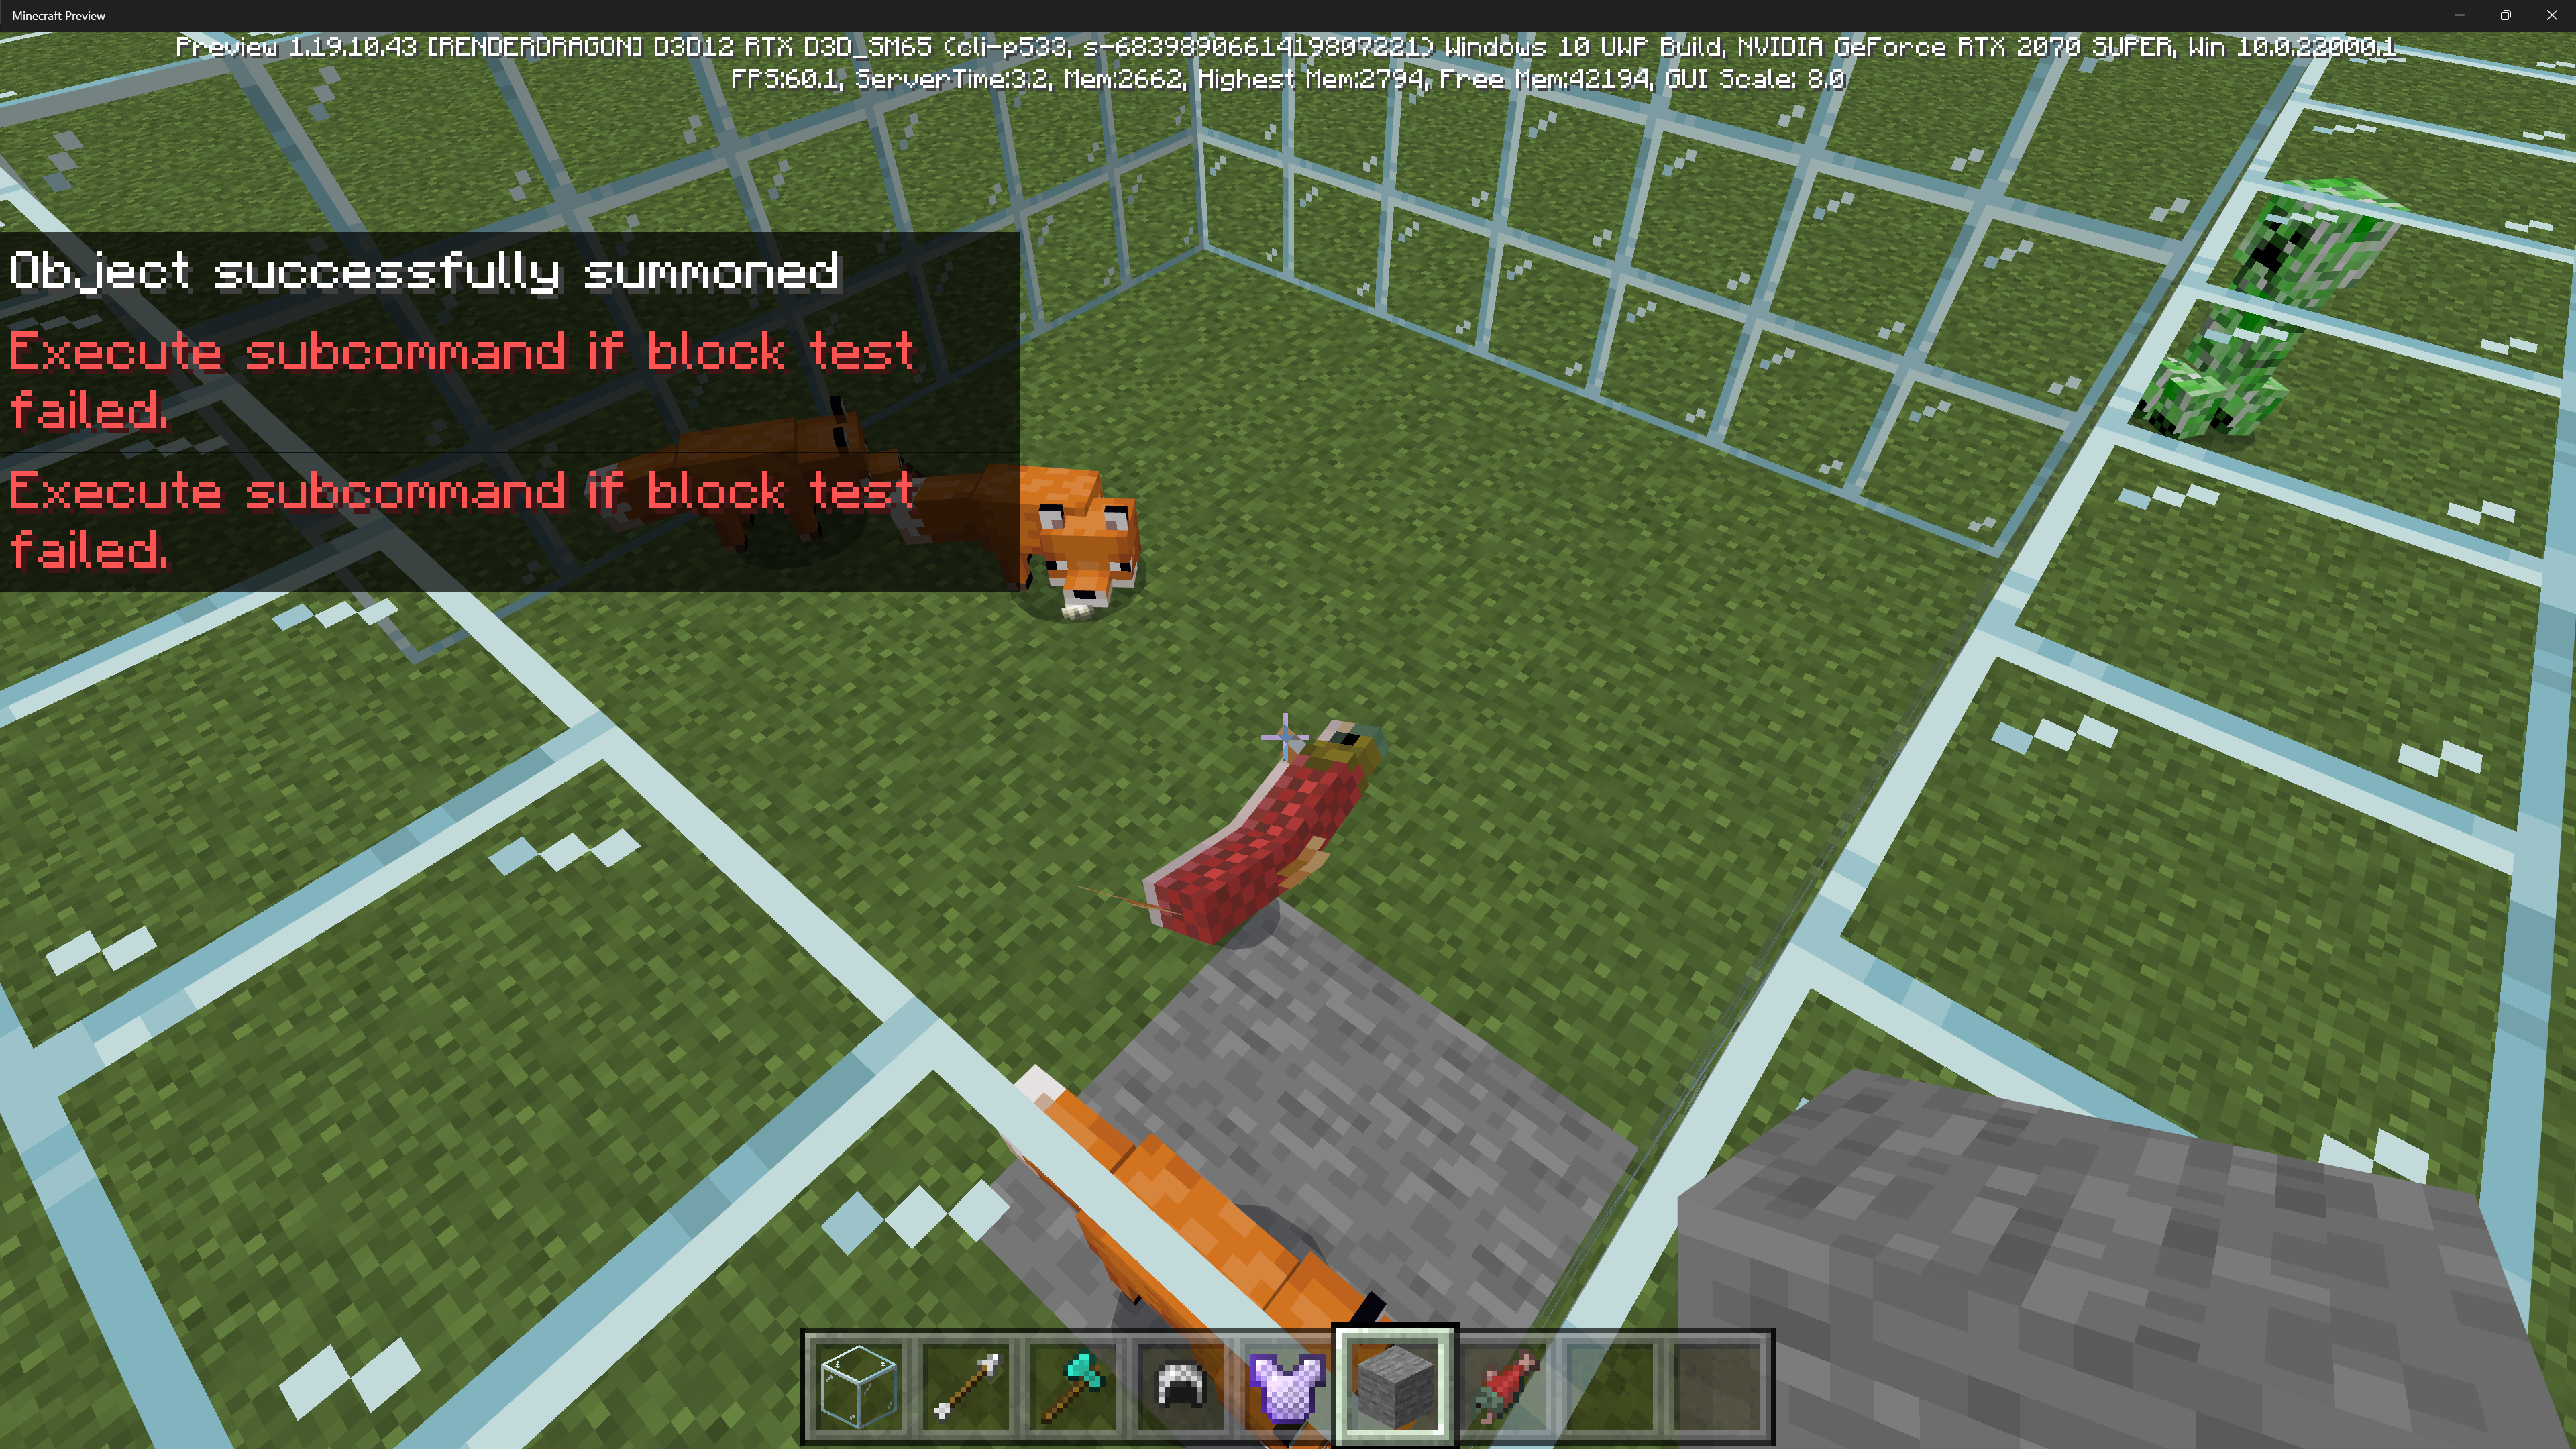 New execute command support in Minecraft version 1.19.70